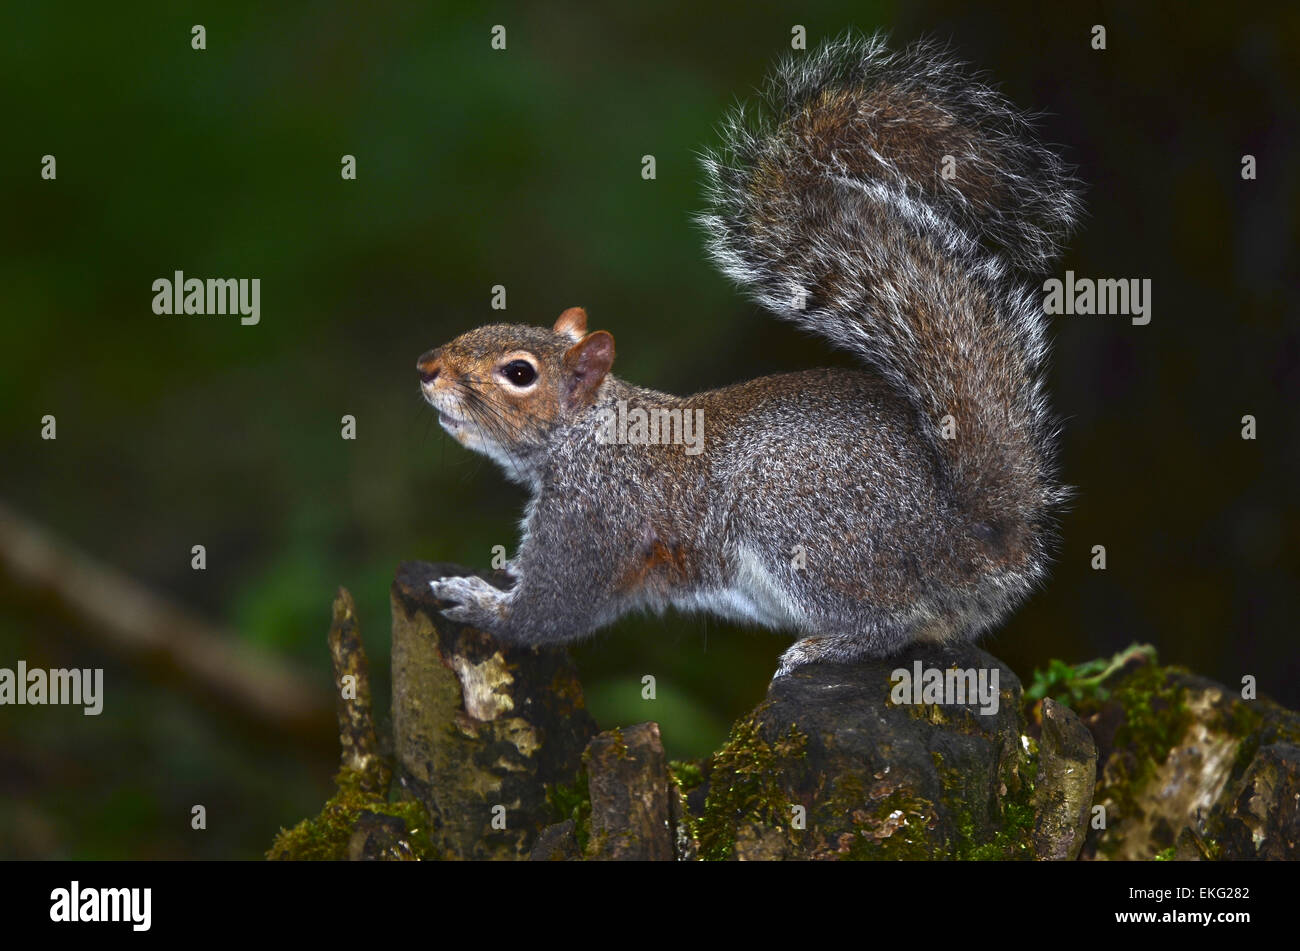 A grey squirrel perched on a tree stump UK Stock Photo